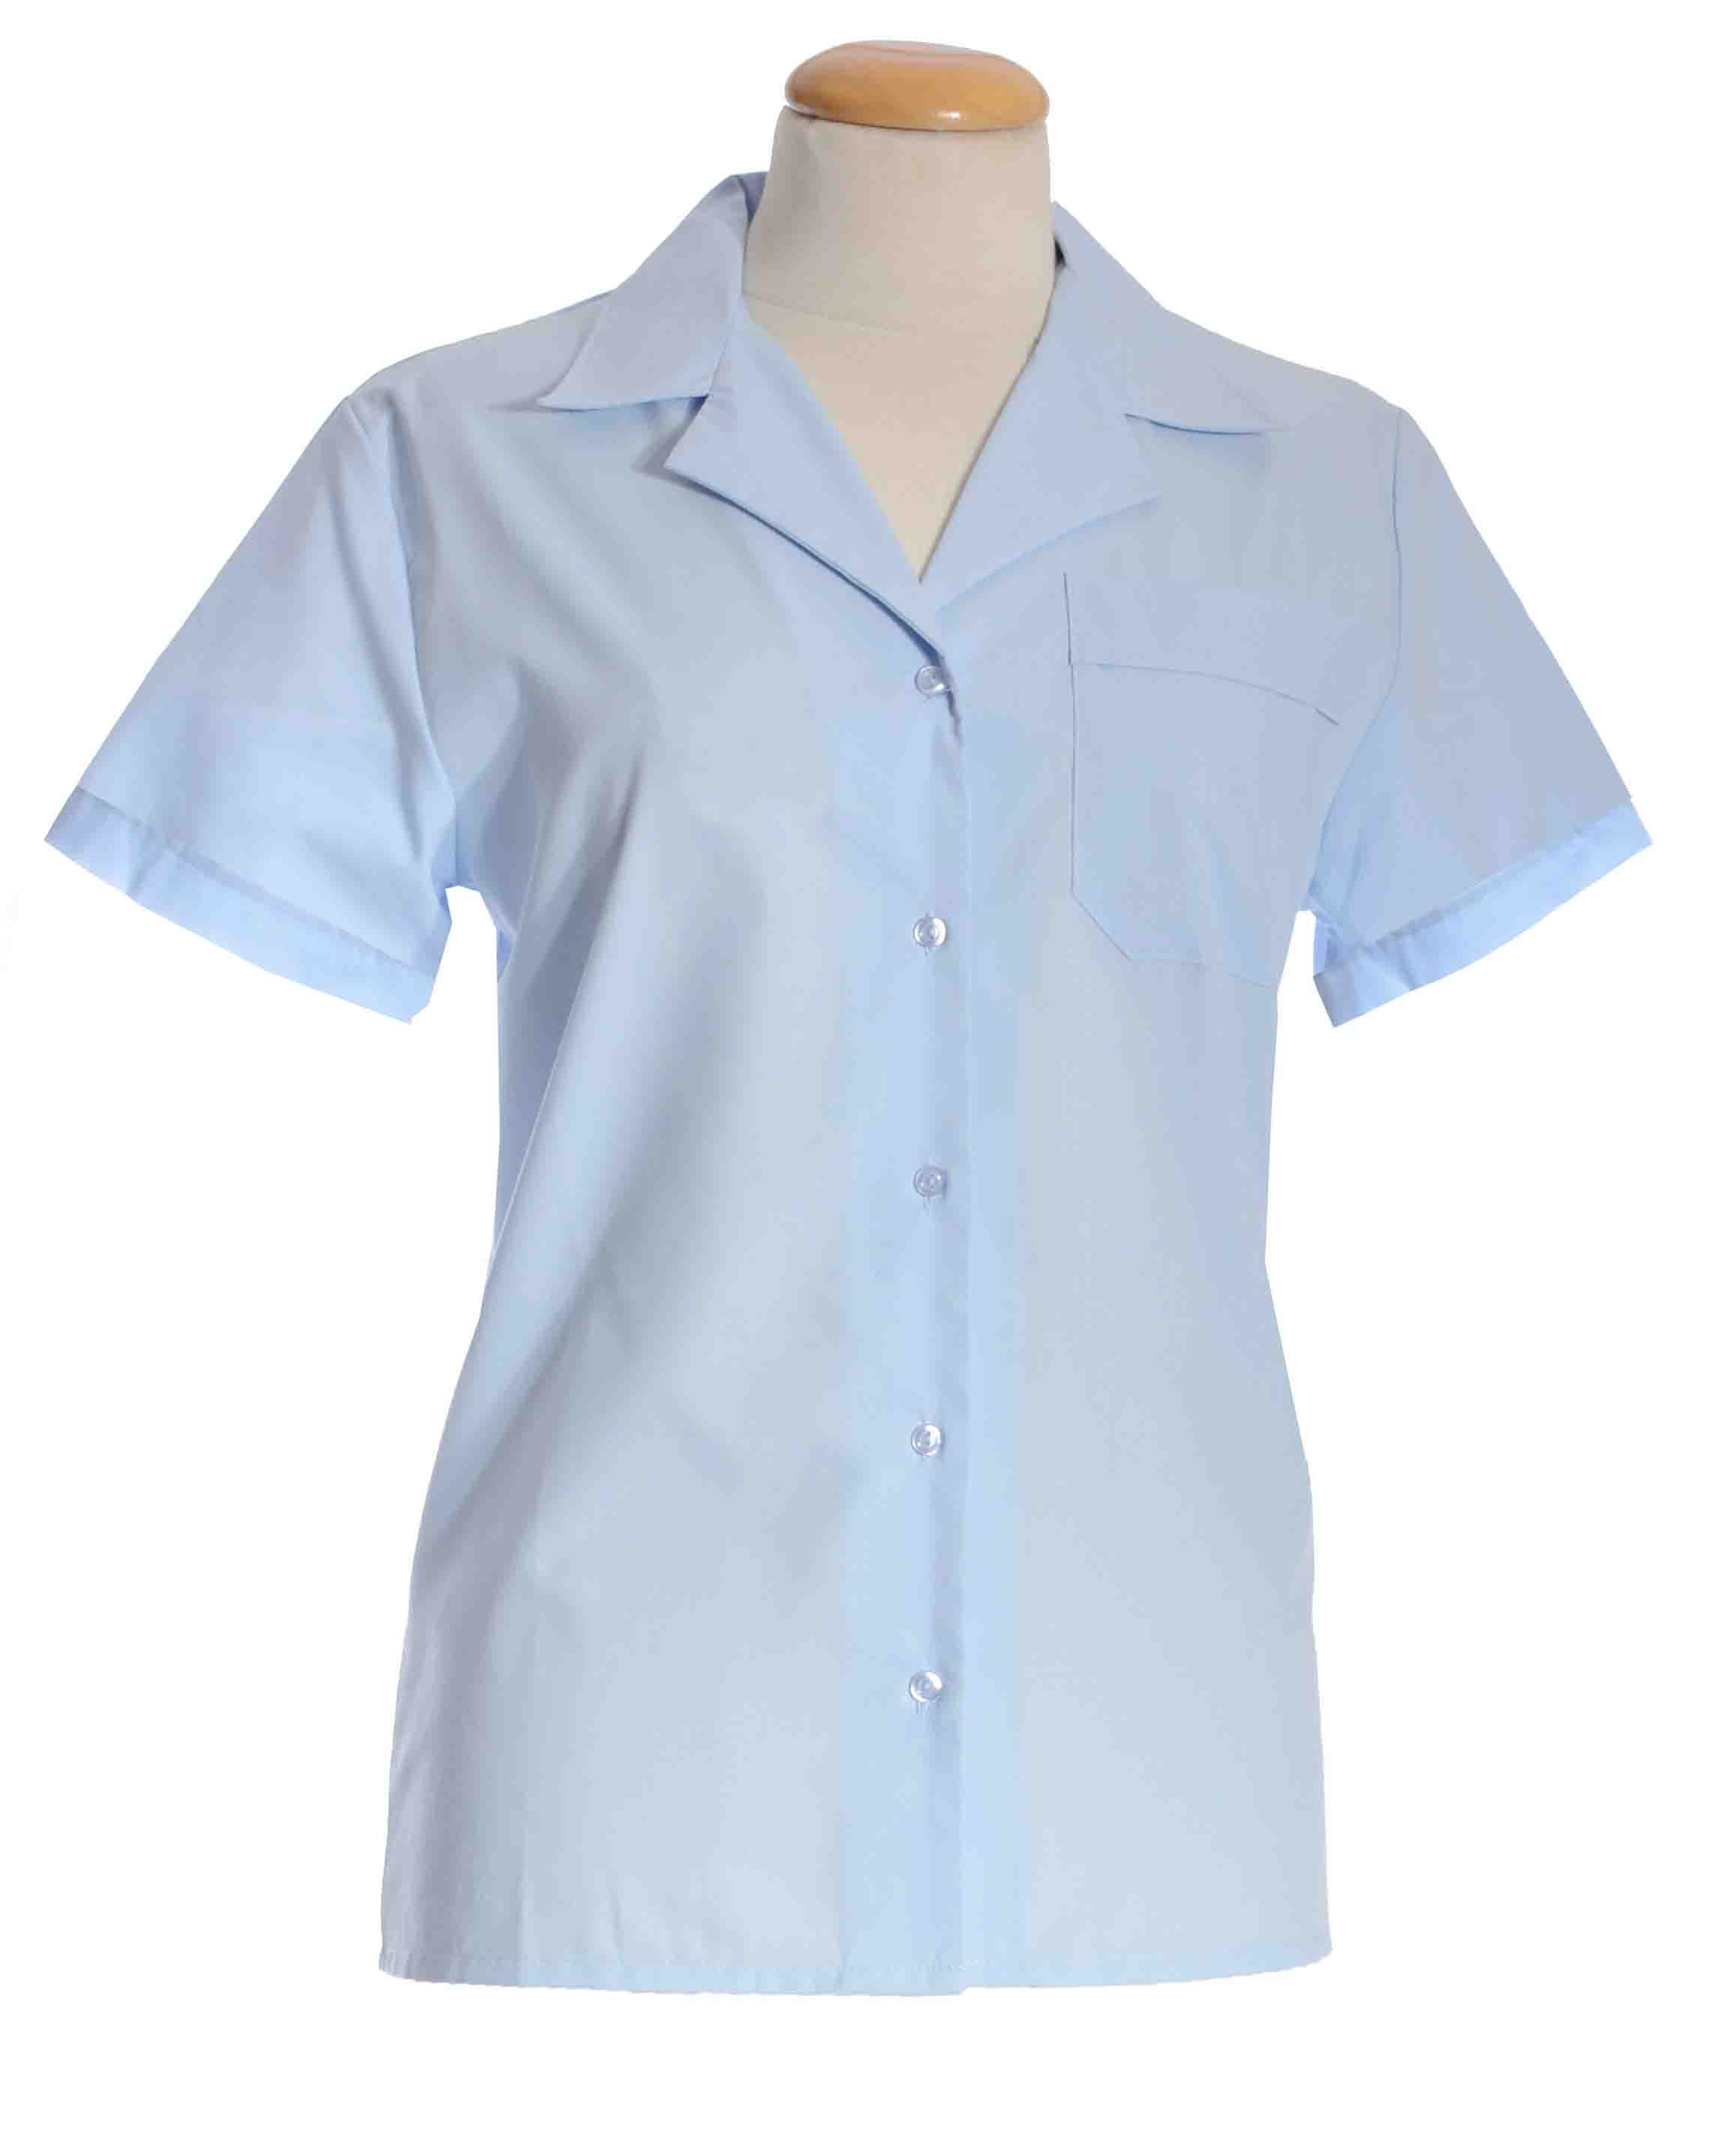 Women’s Double TWO Short Sleeve Easy Care Shirt